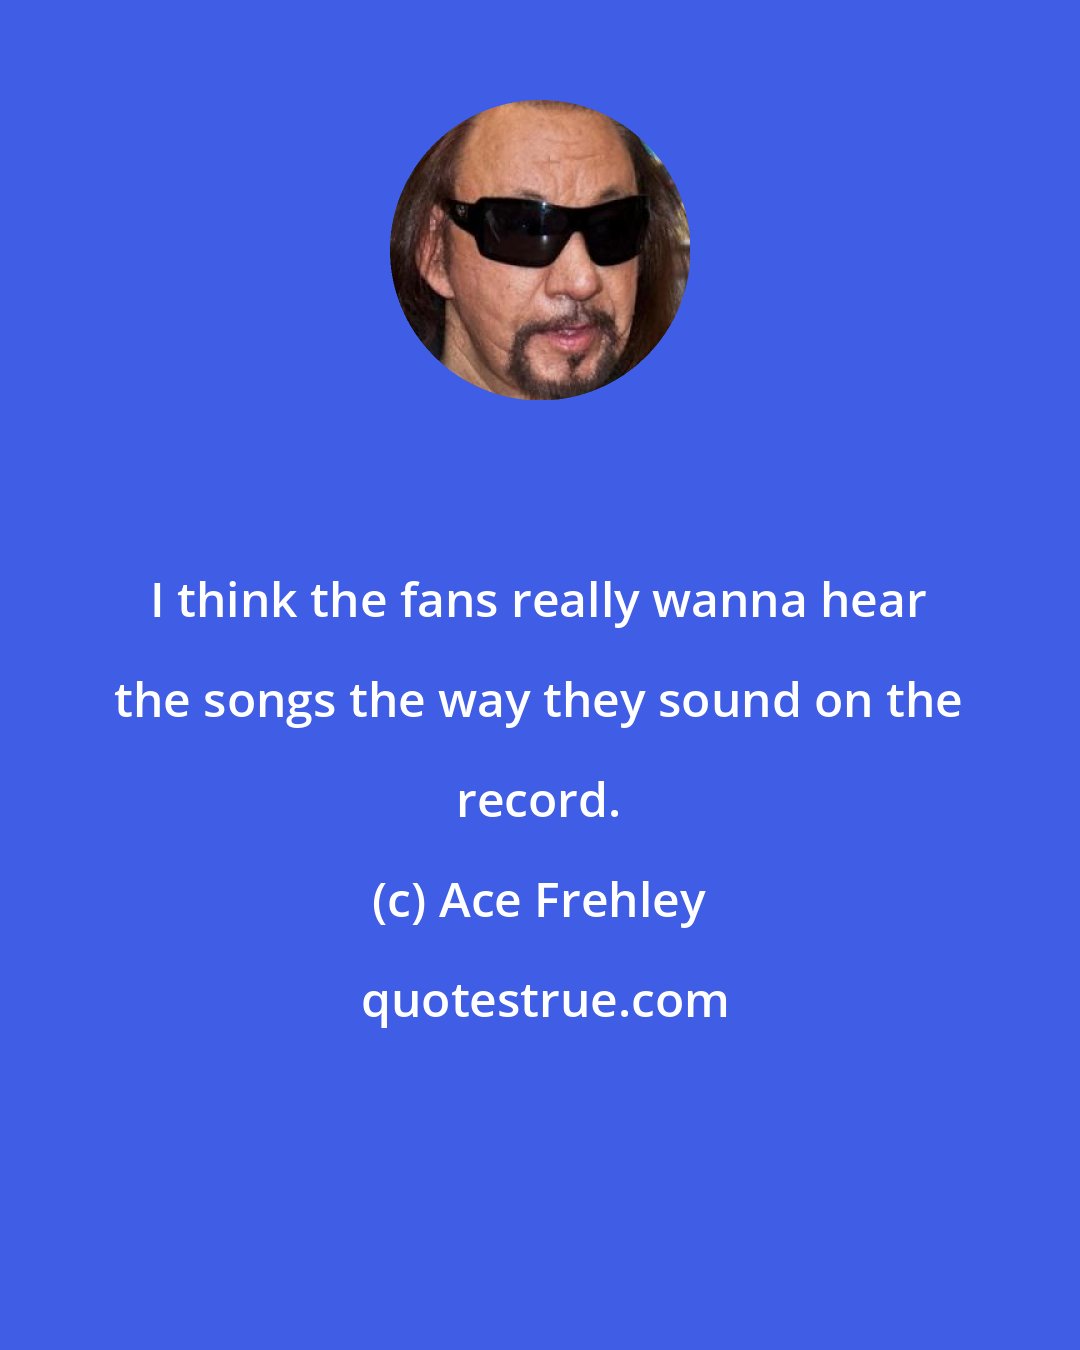 Ace Frehley: I think the fans really wanna hear the songs the way they sound on the record.